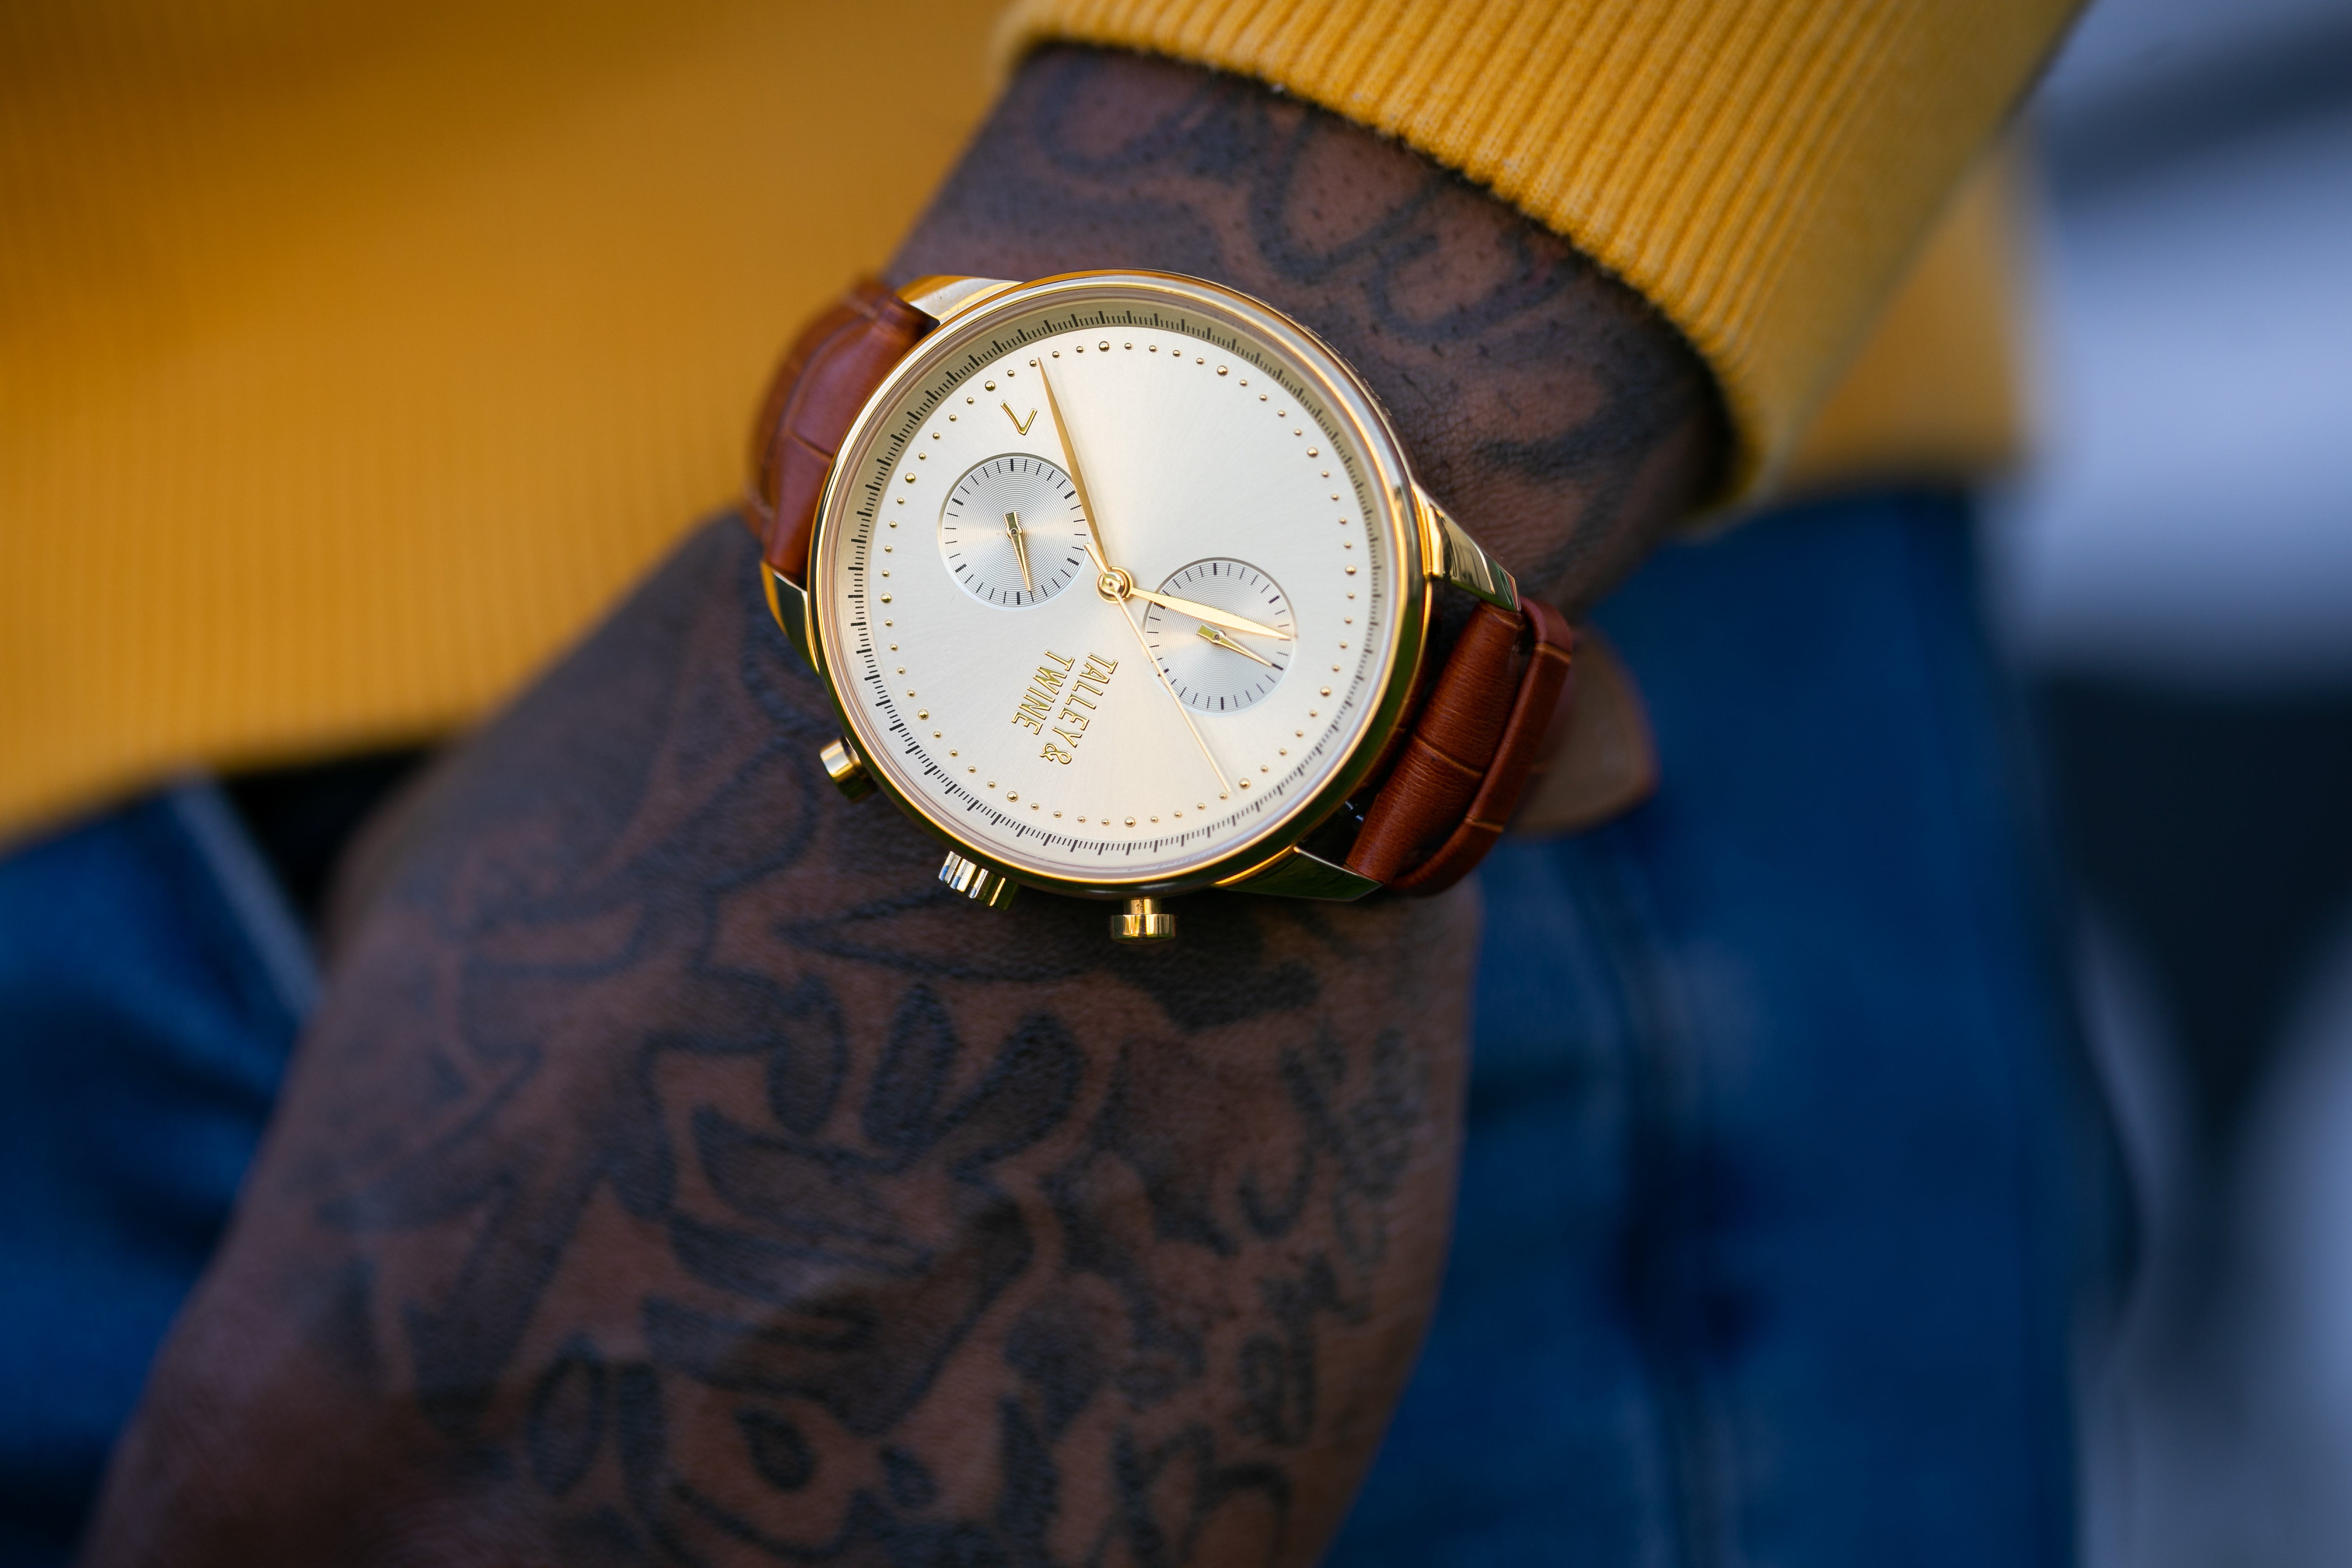 A Tally & Twine watch with a leather strap worn by a model against their jeans and a bright yellow sweater. 